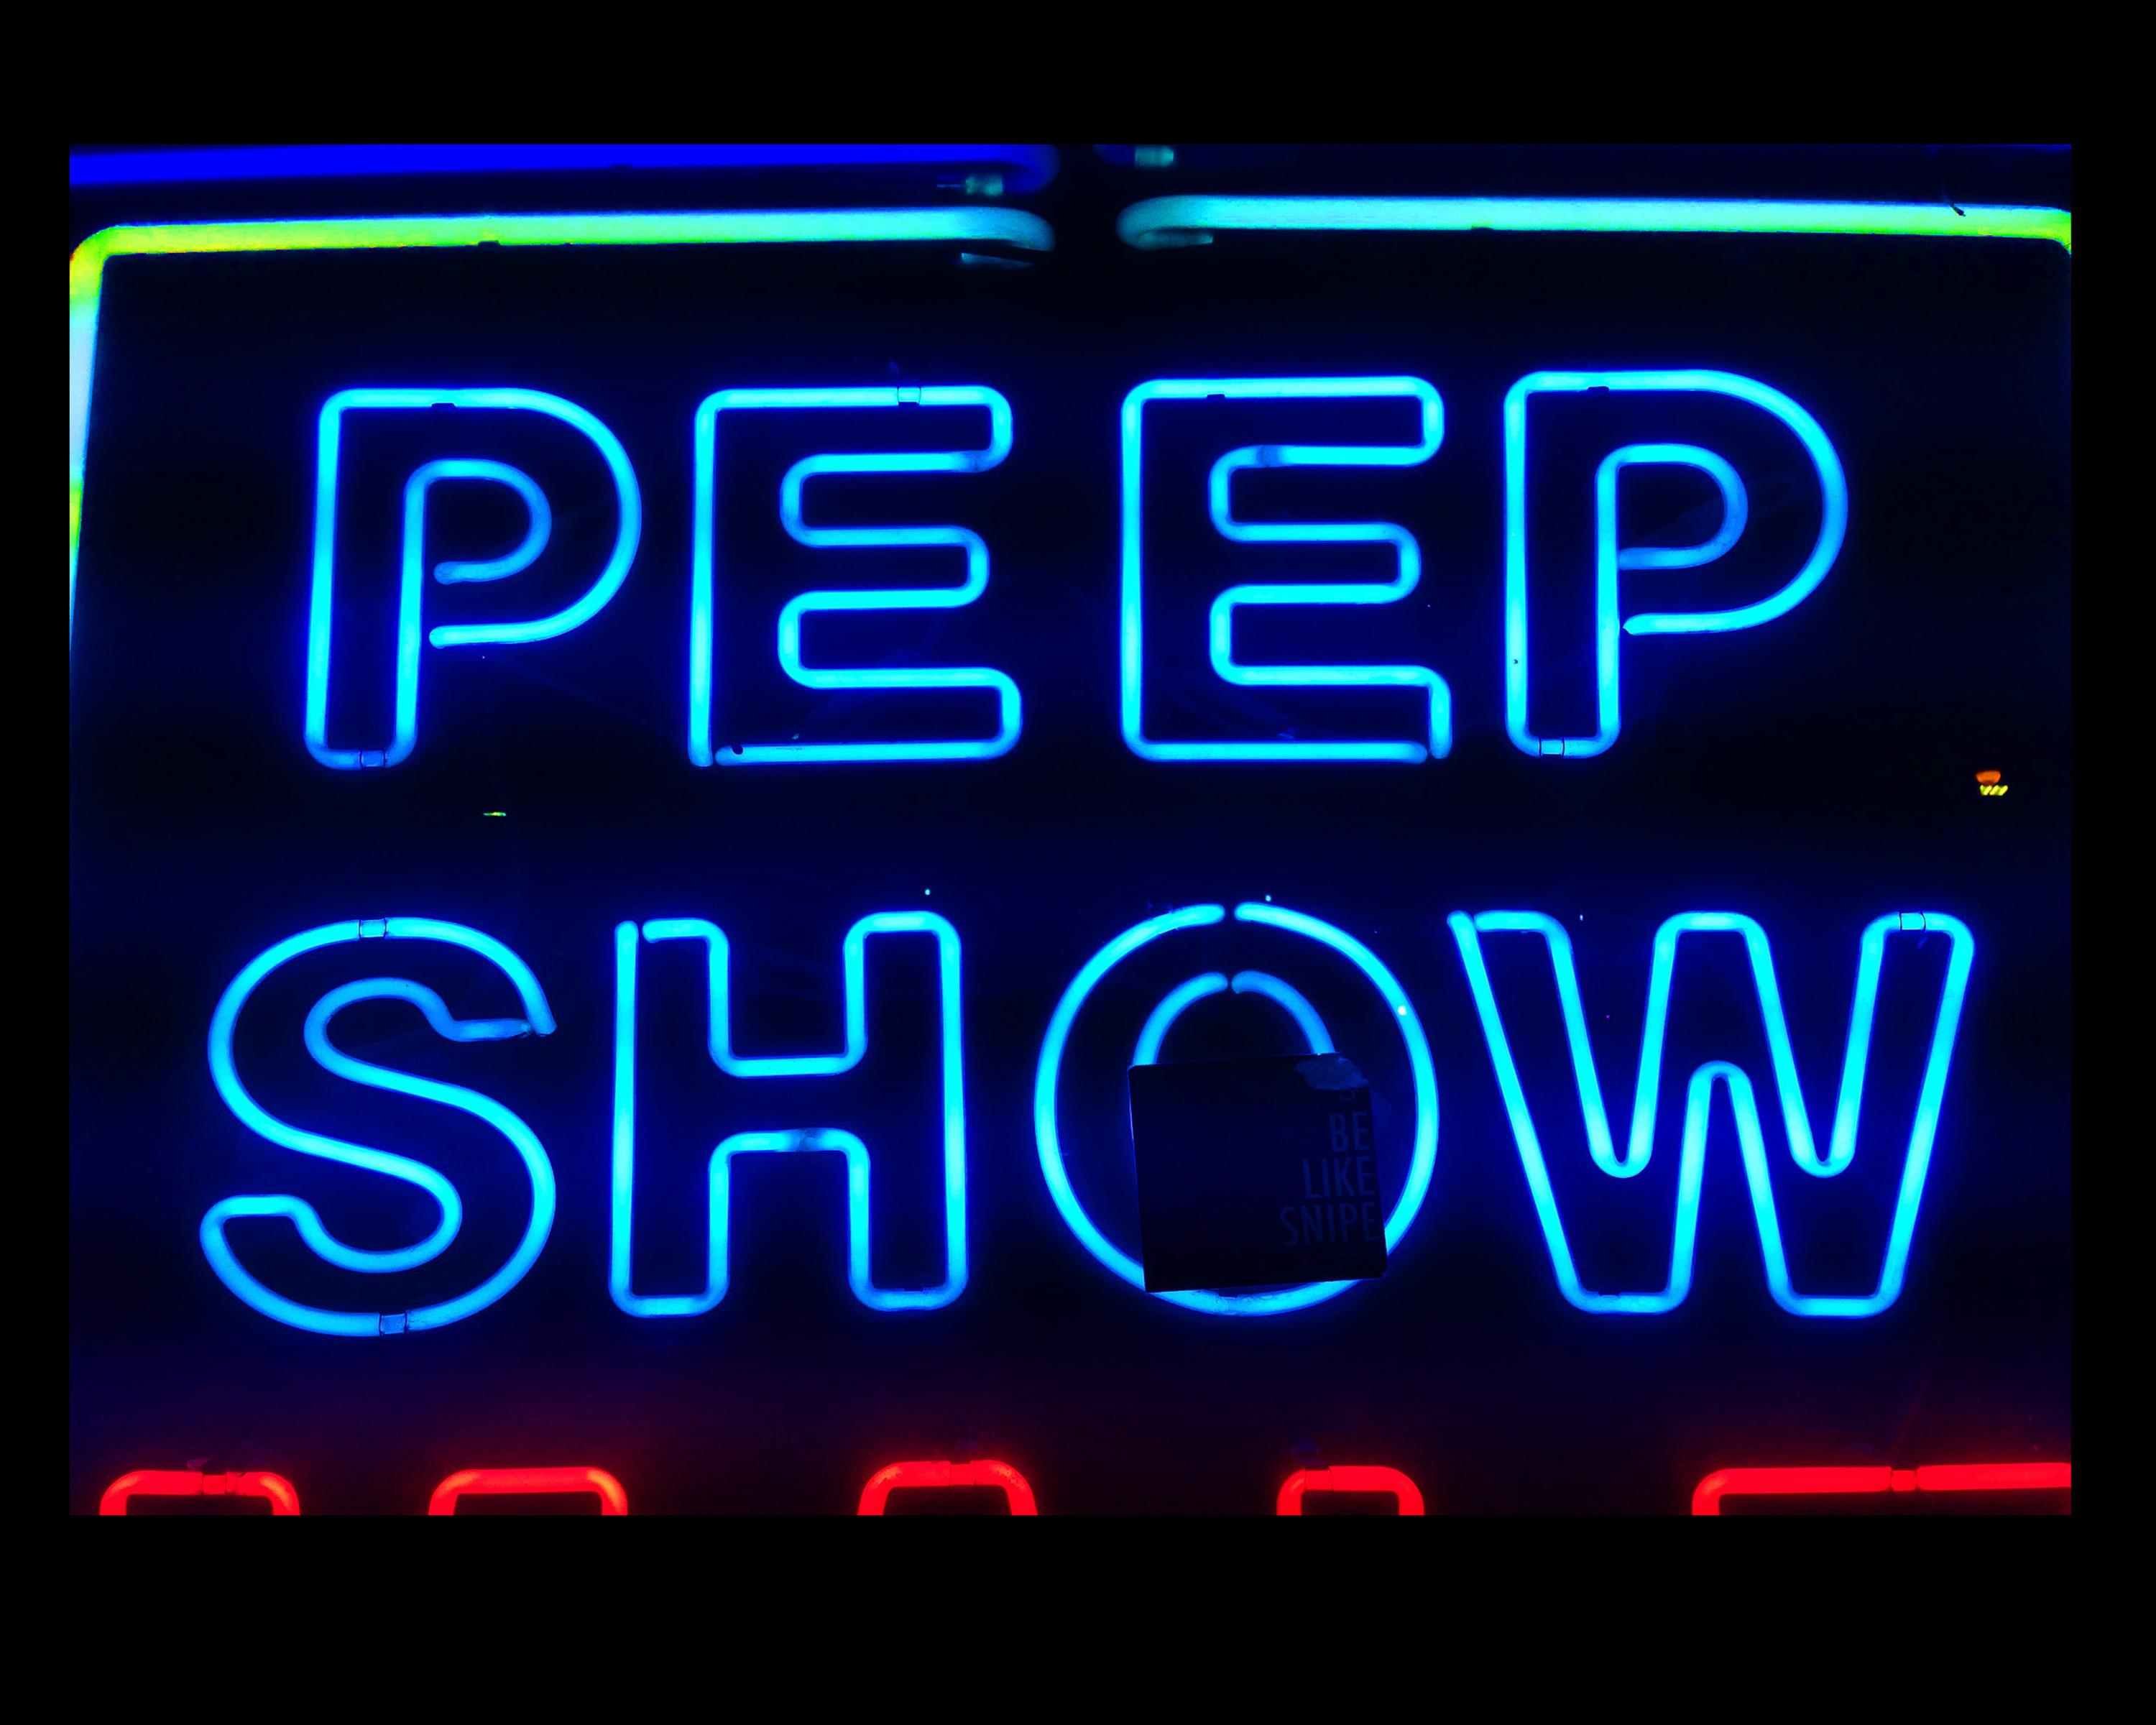 Richard Heeps Print - Private Booths, New York - Neon Color Street Photography